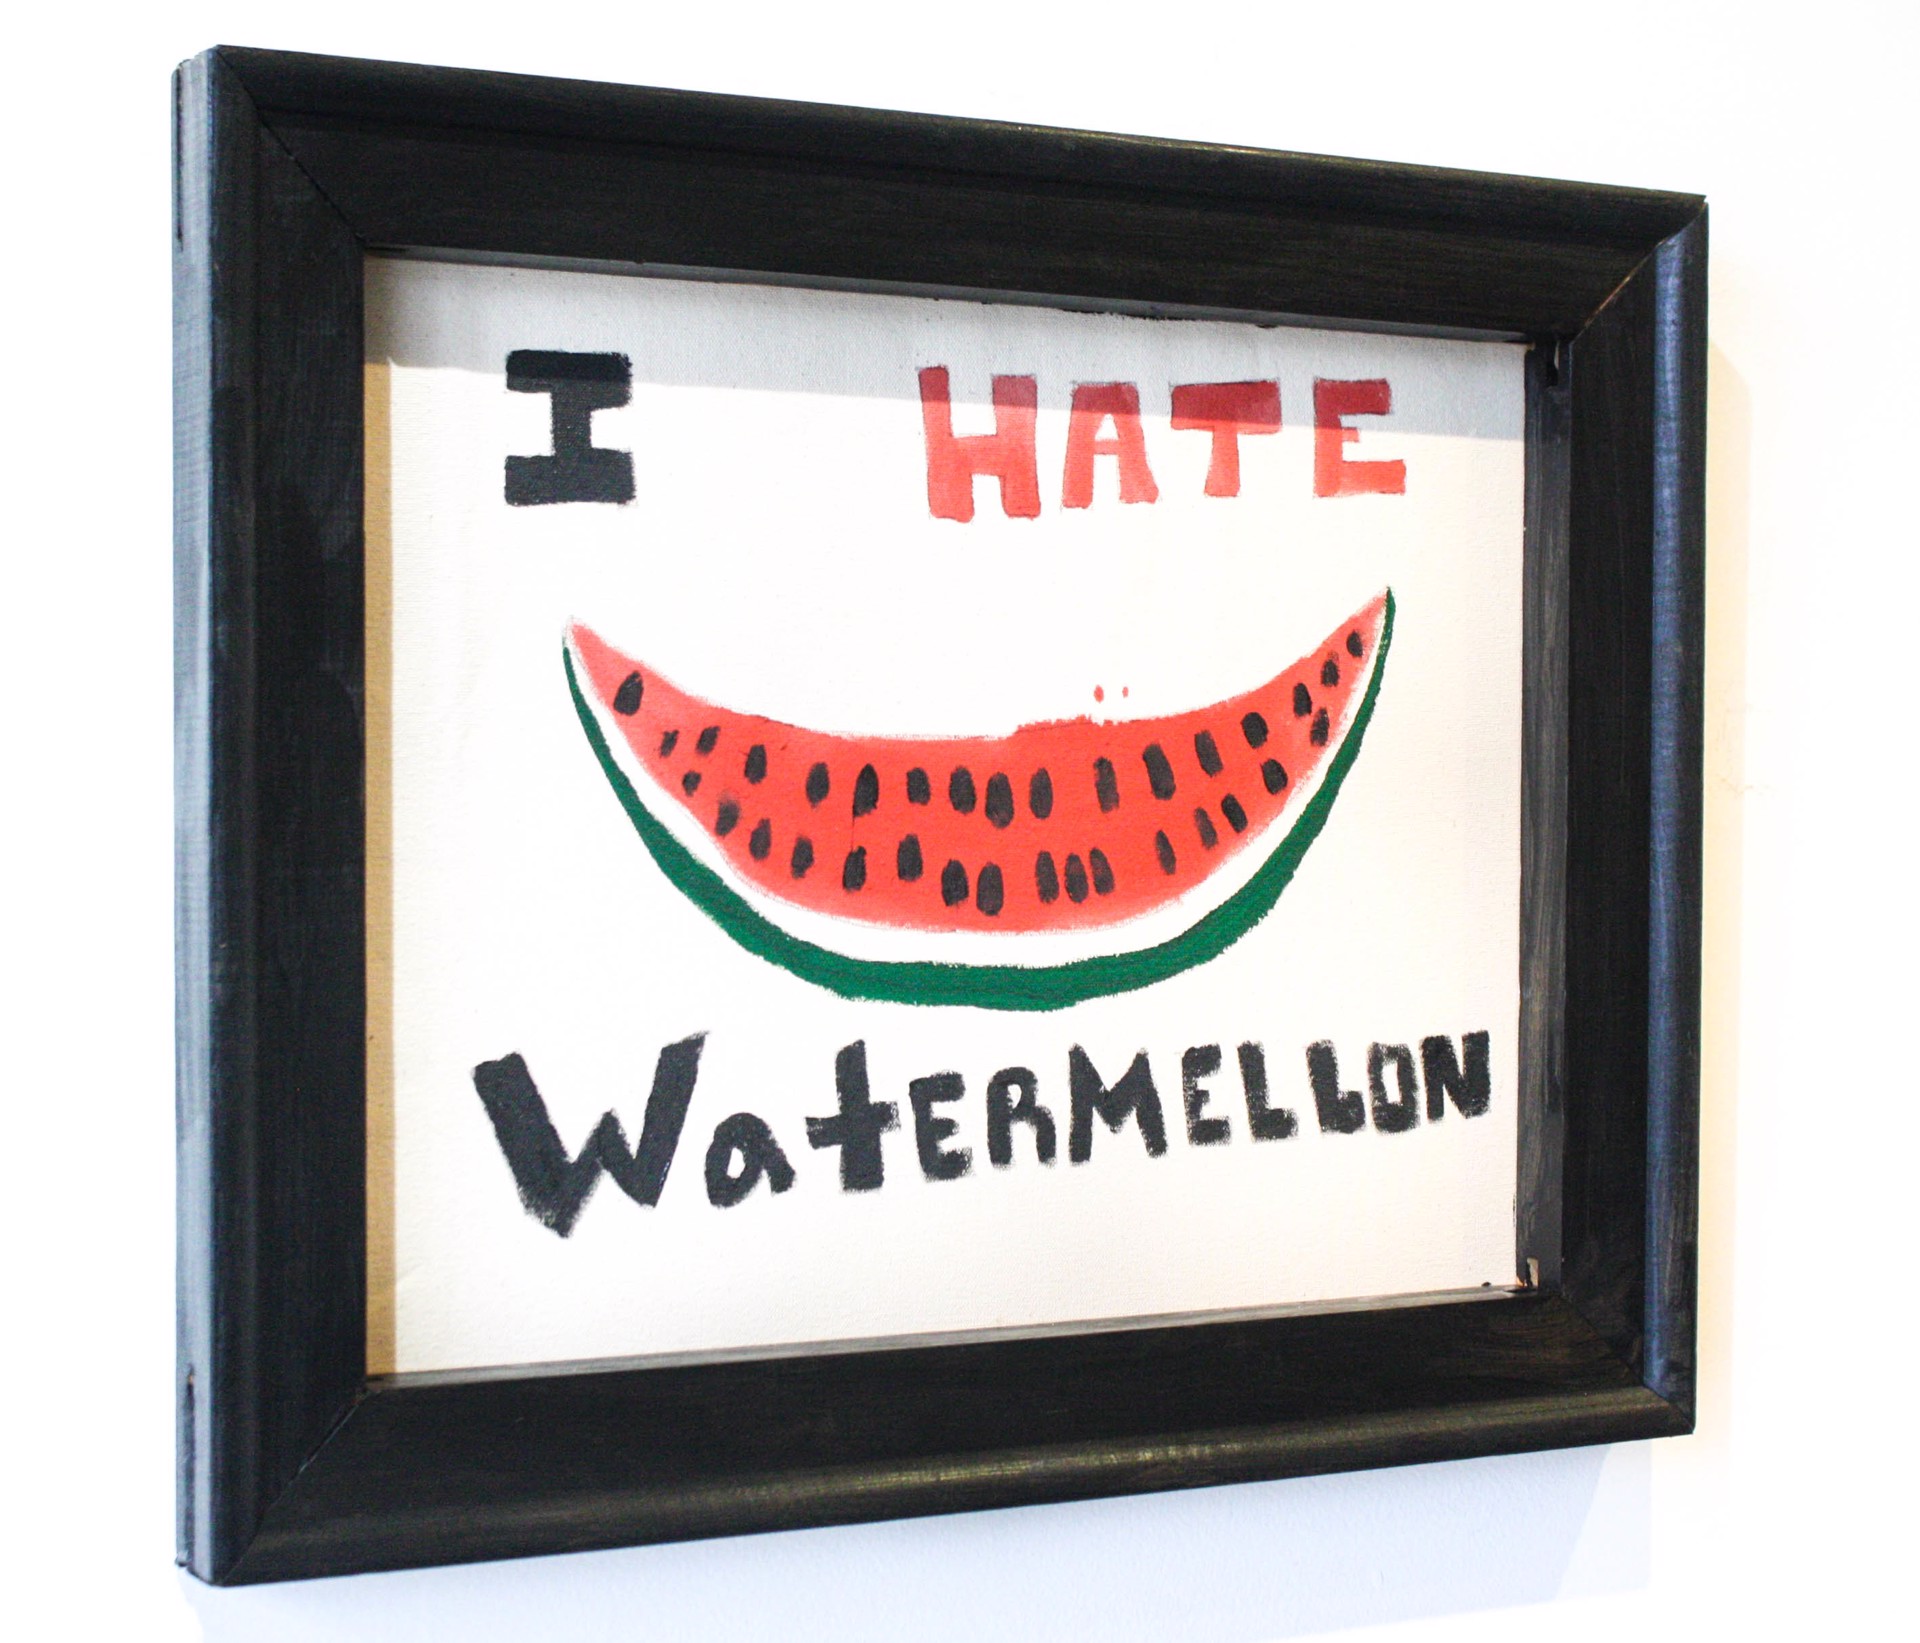 Little Known Fact About Me (I Hate Watermelon) by Marlos E'van